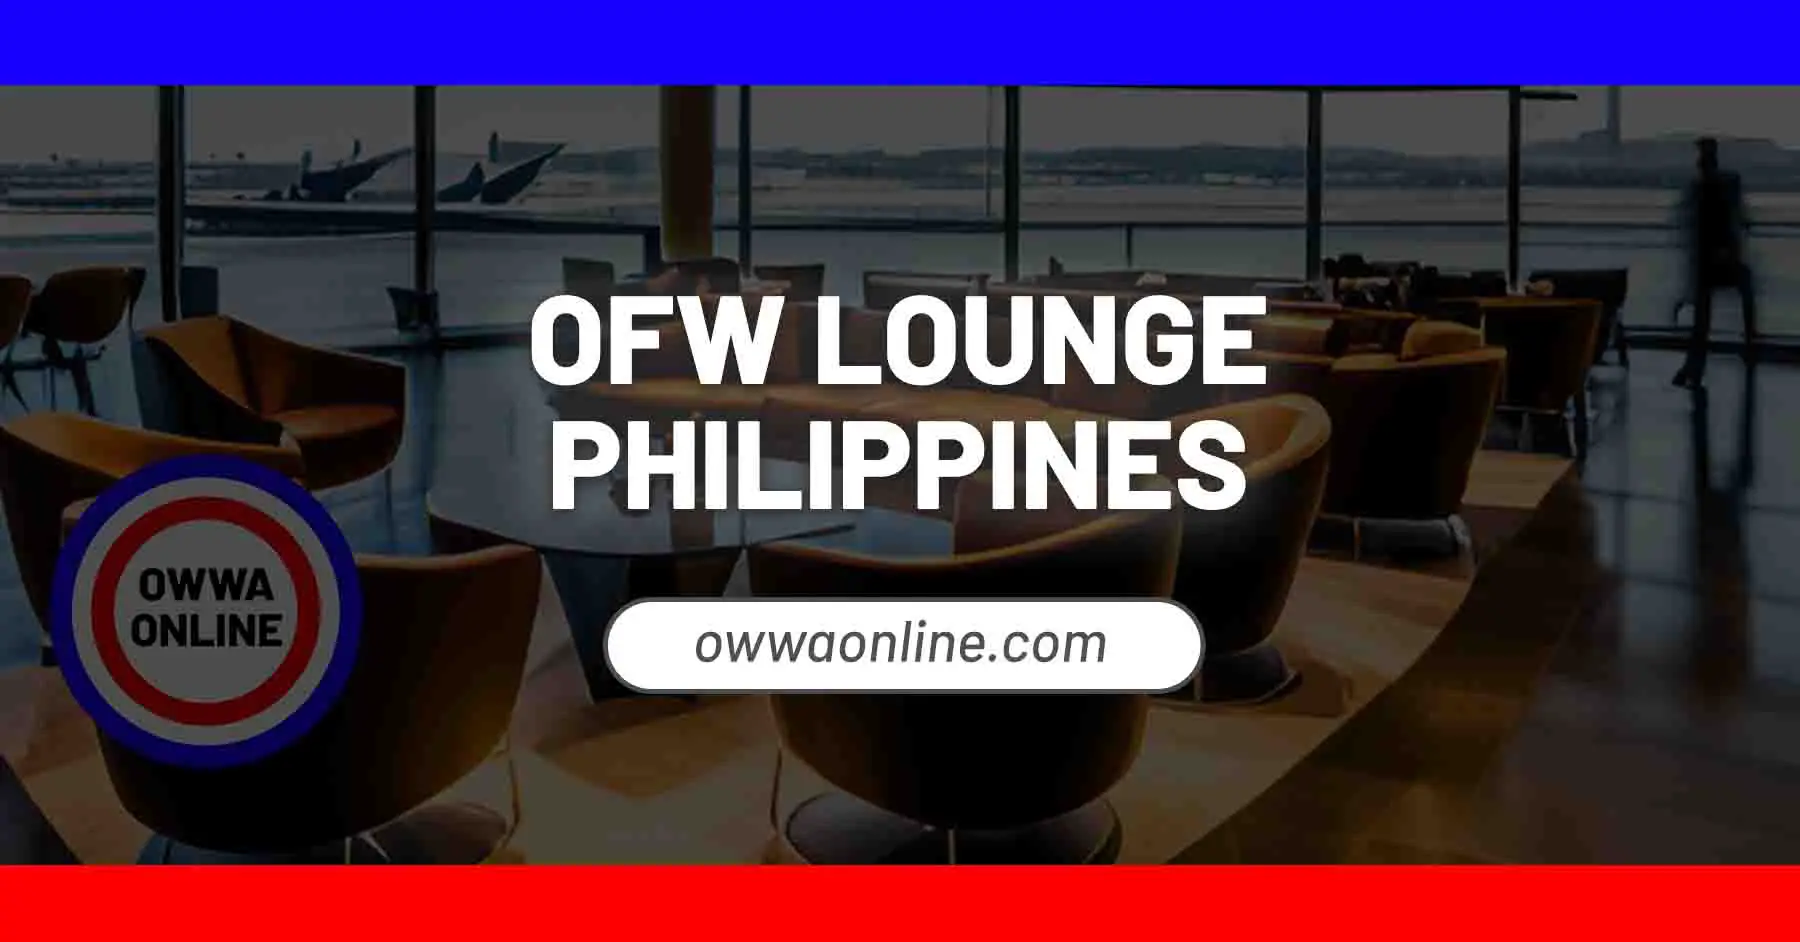 ofw airport lounge vip lounge for filipino migrant workers philippines